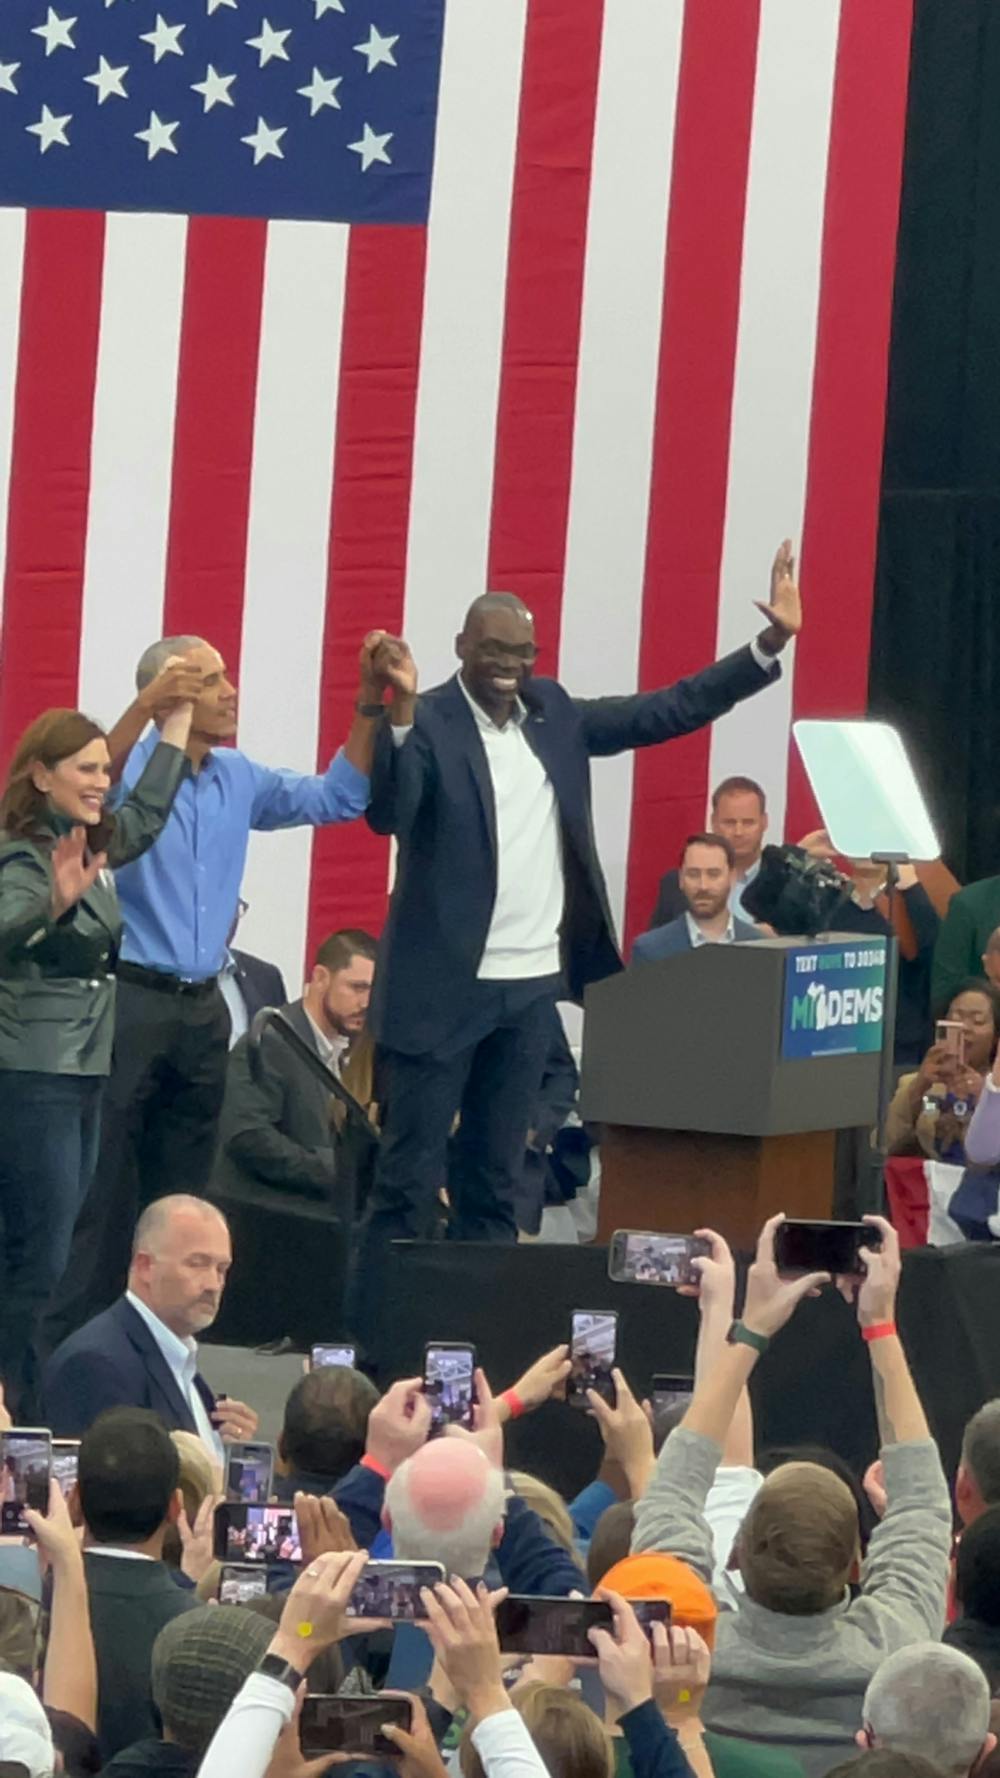 Gov. Gretchen Whitmer, former President Barack Obama and Deputy Gov. Garlin Gilchrist hold hands and raise their arms, to celebrate a successful campaign event. Courtesy photo.